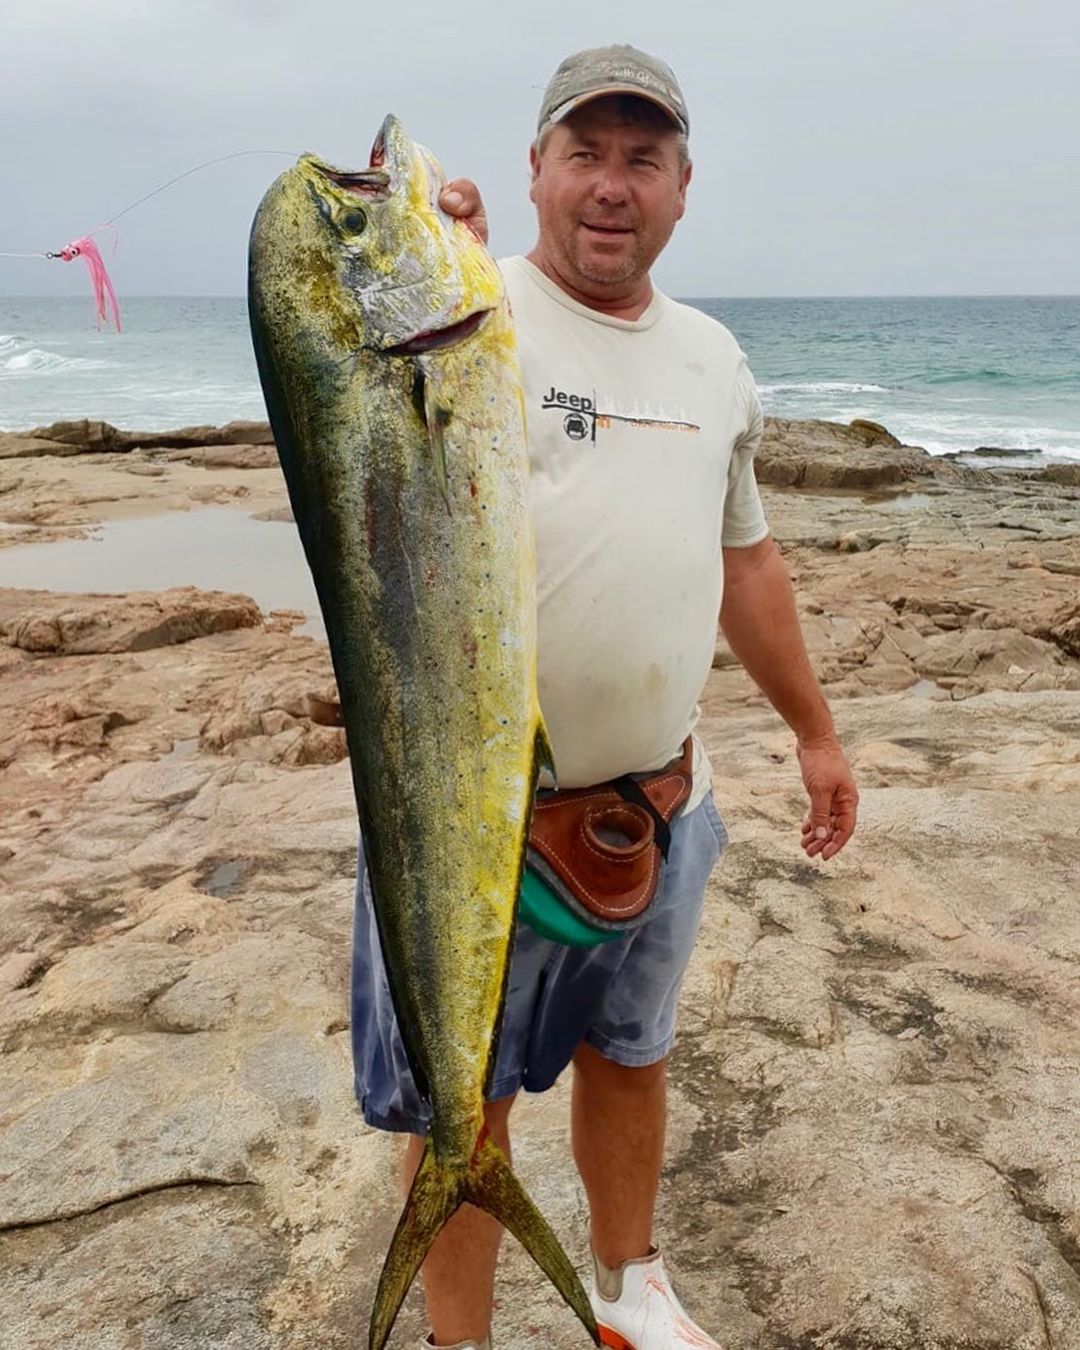 Awesome #dronefishing catch  Want to target new species from the shore Look no further www.dronefishing.com #fishing  #fishing #dorado #mahimahi #drone #dji #shorebasedangling #catchoftheday.jpg__PID:3b77b3bd-31bb-4013-bb1b-021fbee0b7ed